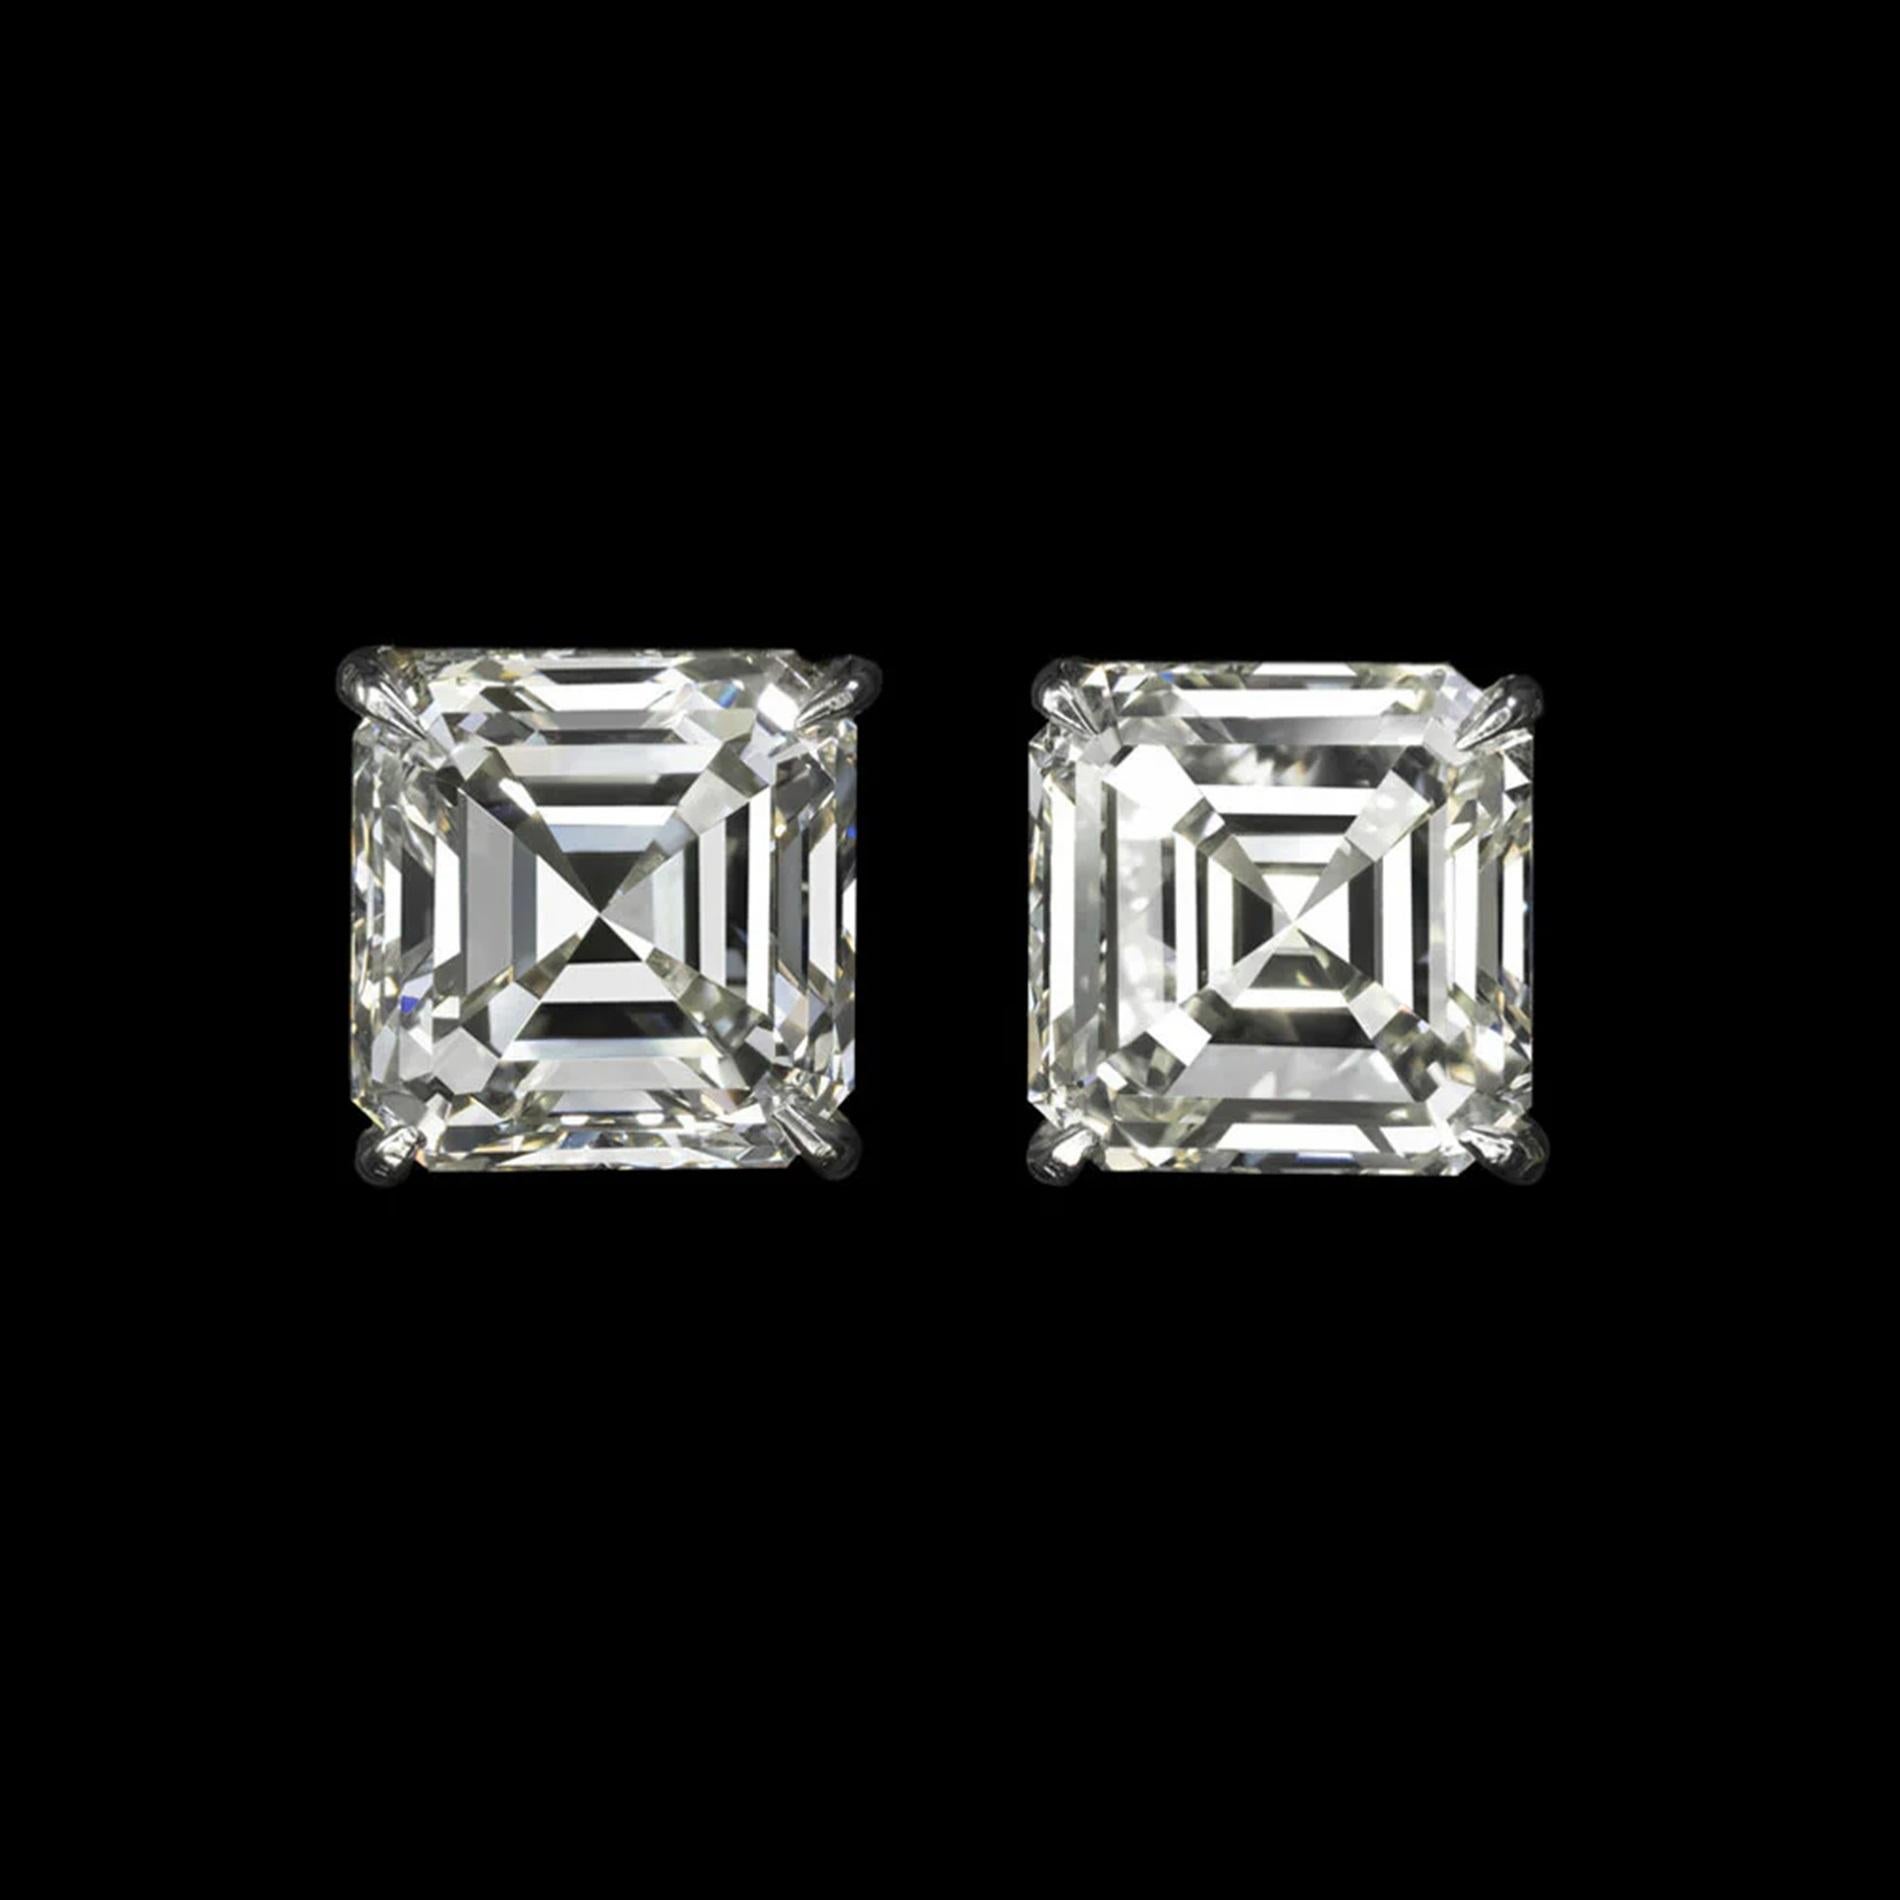 Indulge in the timeless allure of these exquisite Asscher-cut diamond stud earrings, meticulously crafted to captivate with their dazzling elegance. Each earring features a resplendent Asscher-cut diamond, set in lustrous 14K white gold settings,